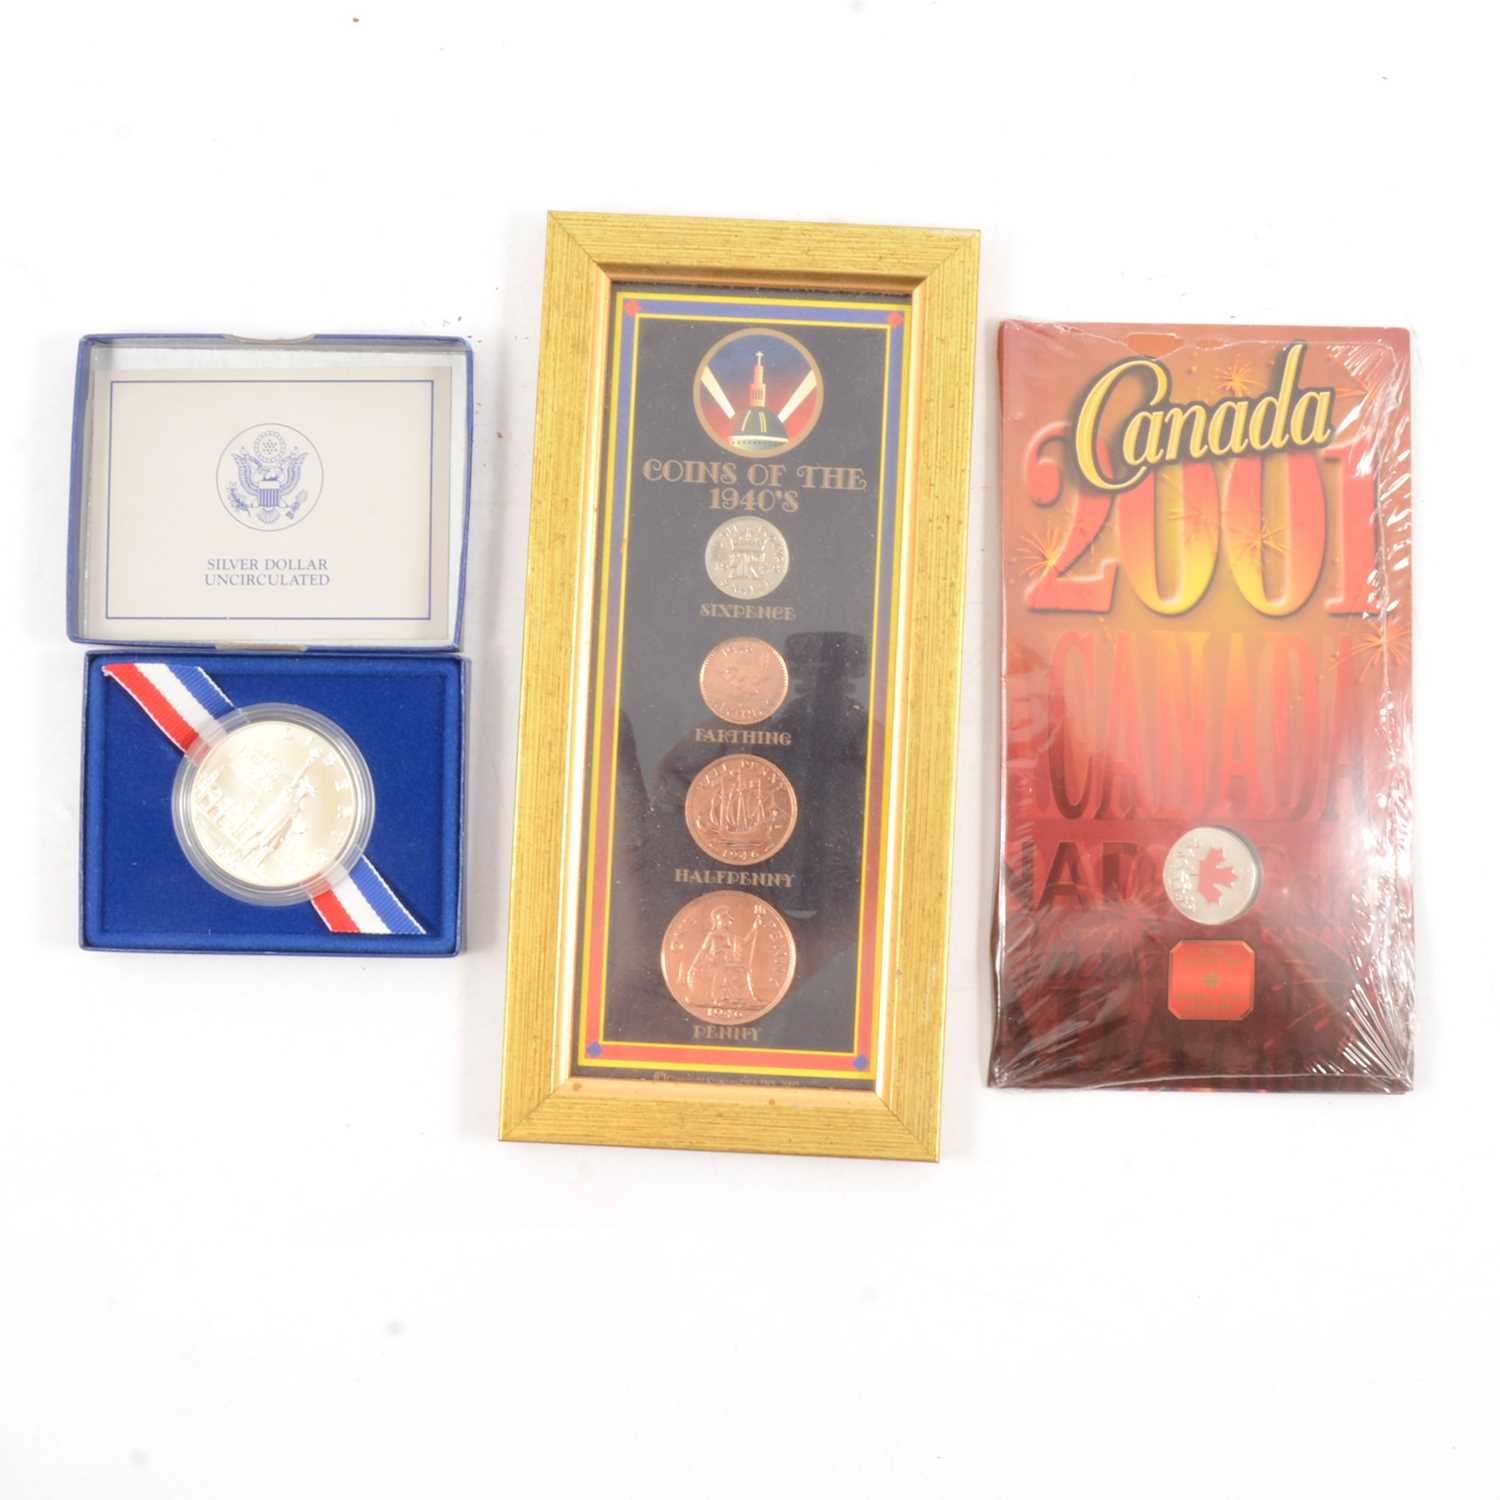 Lot 278 - US silver dollars, Mint Silver Proof Set 2004 and other US, Canada and UK commemorative coin sets.